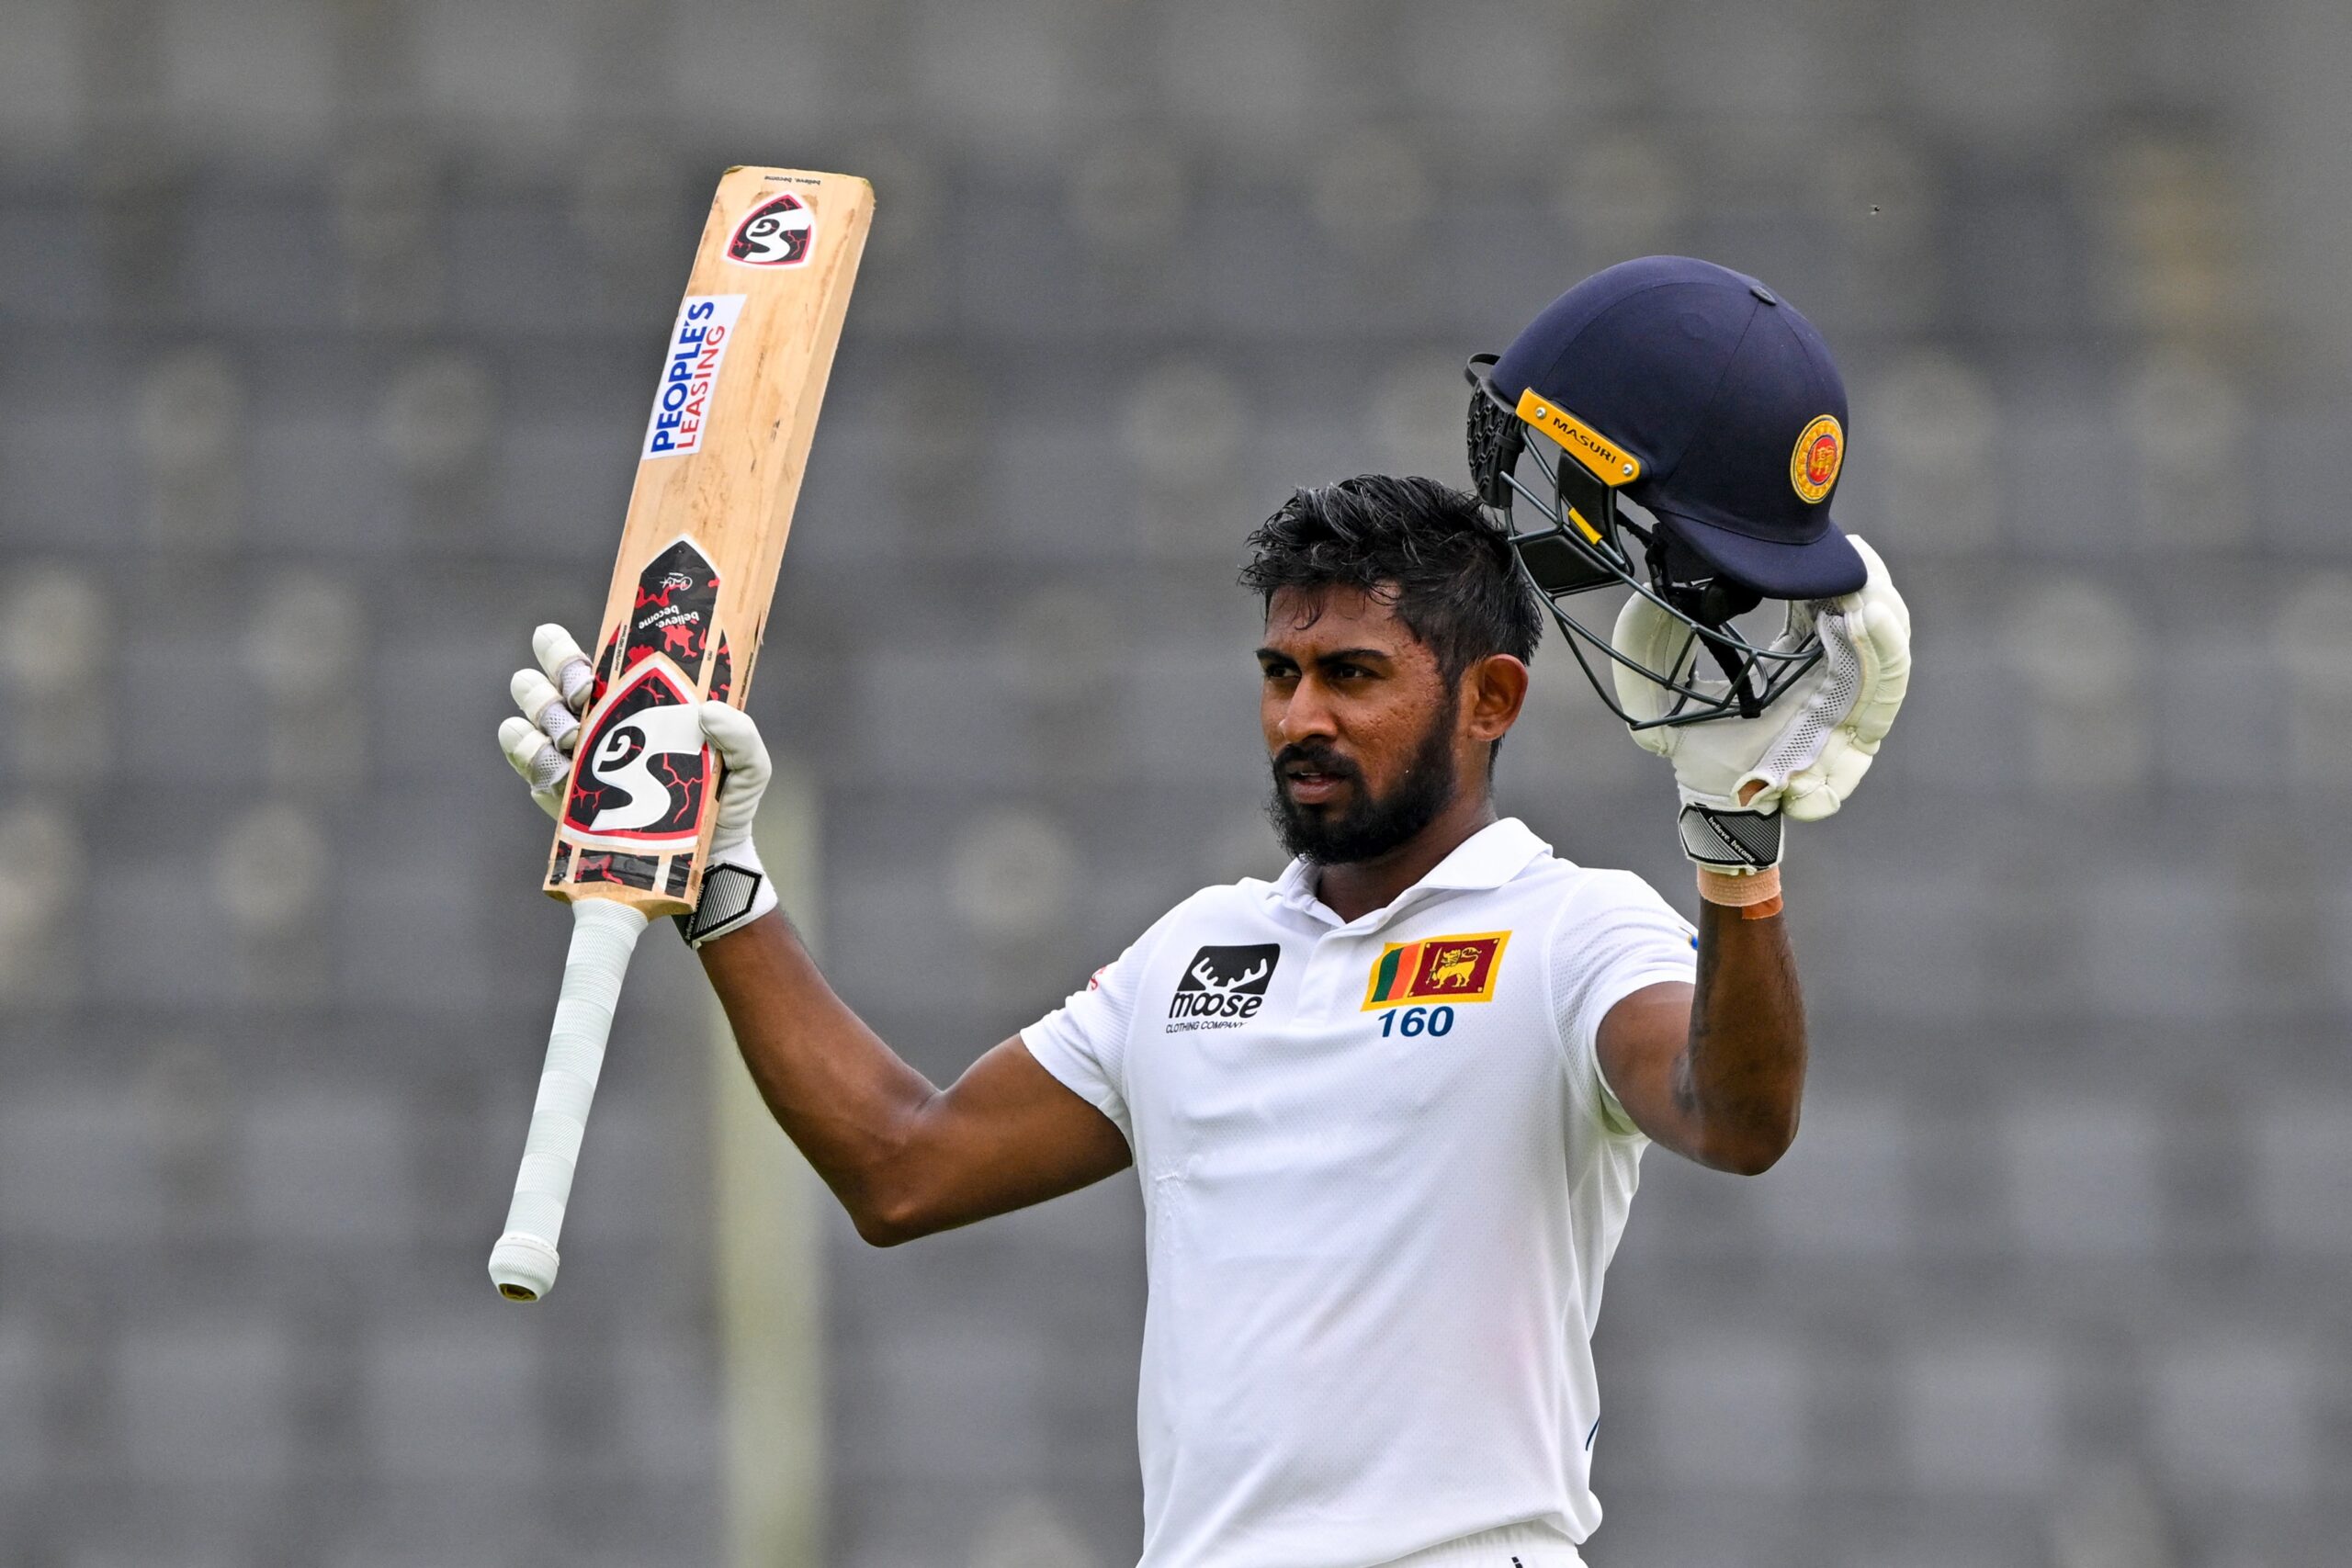 First Time In 147 Years: Sri Lanka Batter Makes History With Massive Achievement